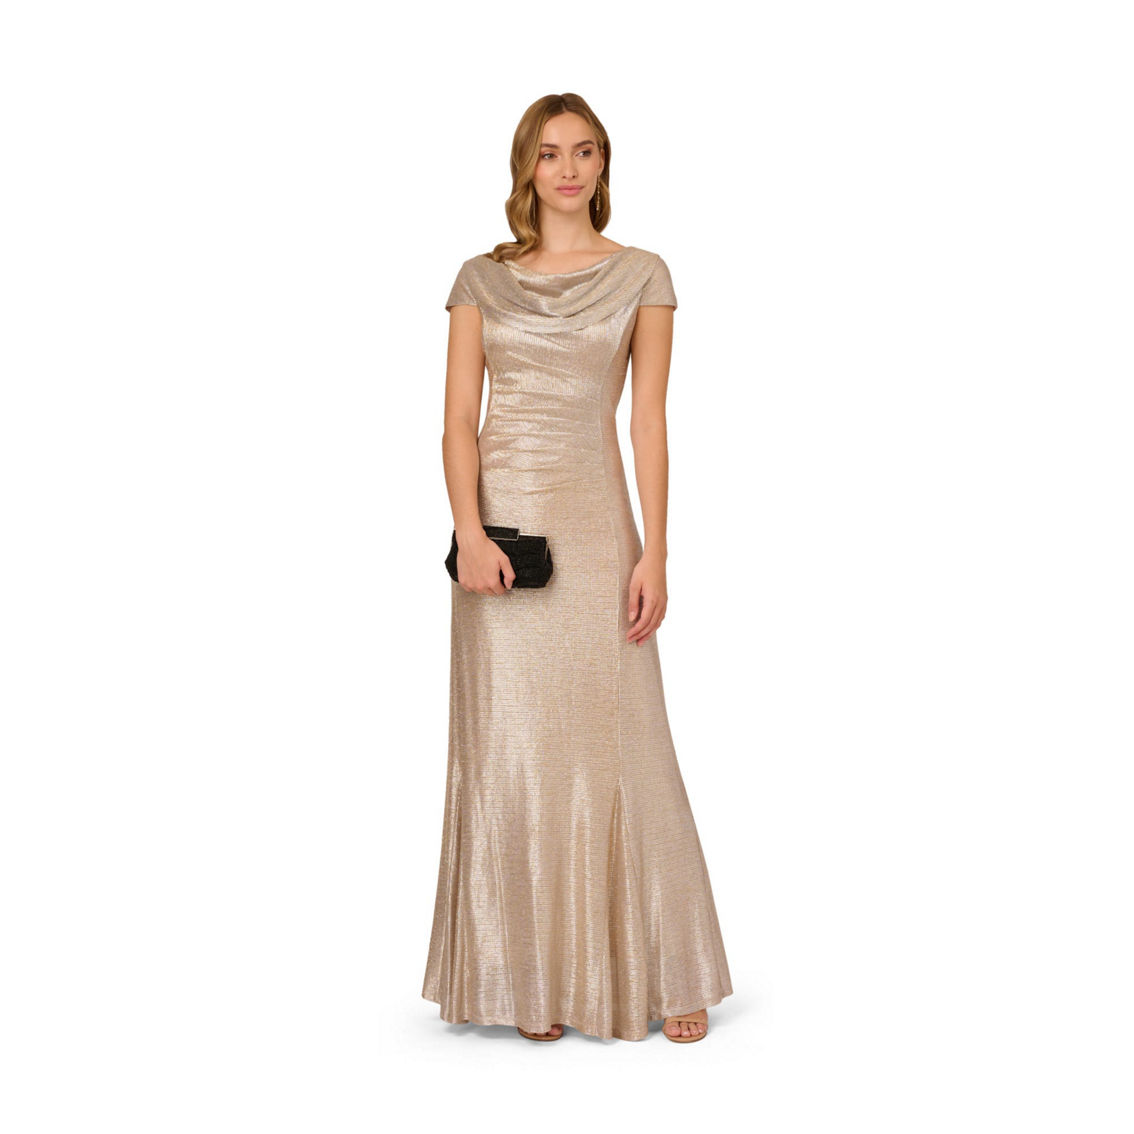 Adrianna Papell Metallic Foil Knit Draped Long Gown - Image 3 of 5